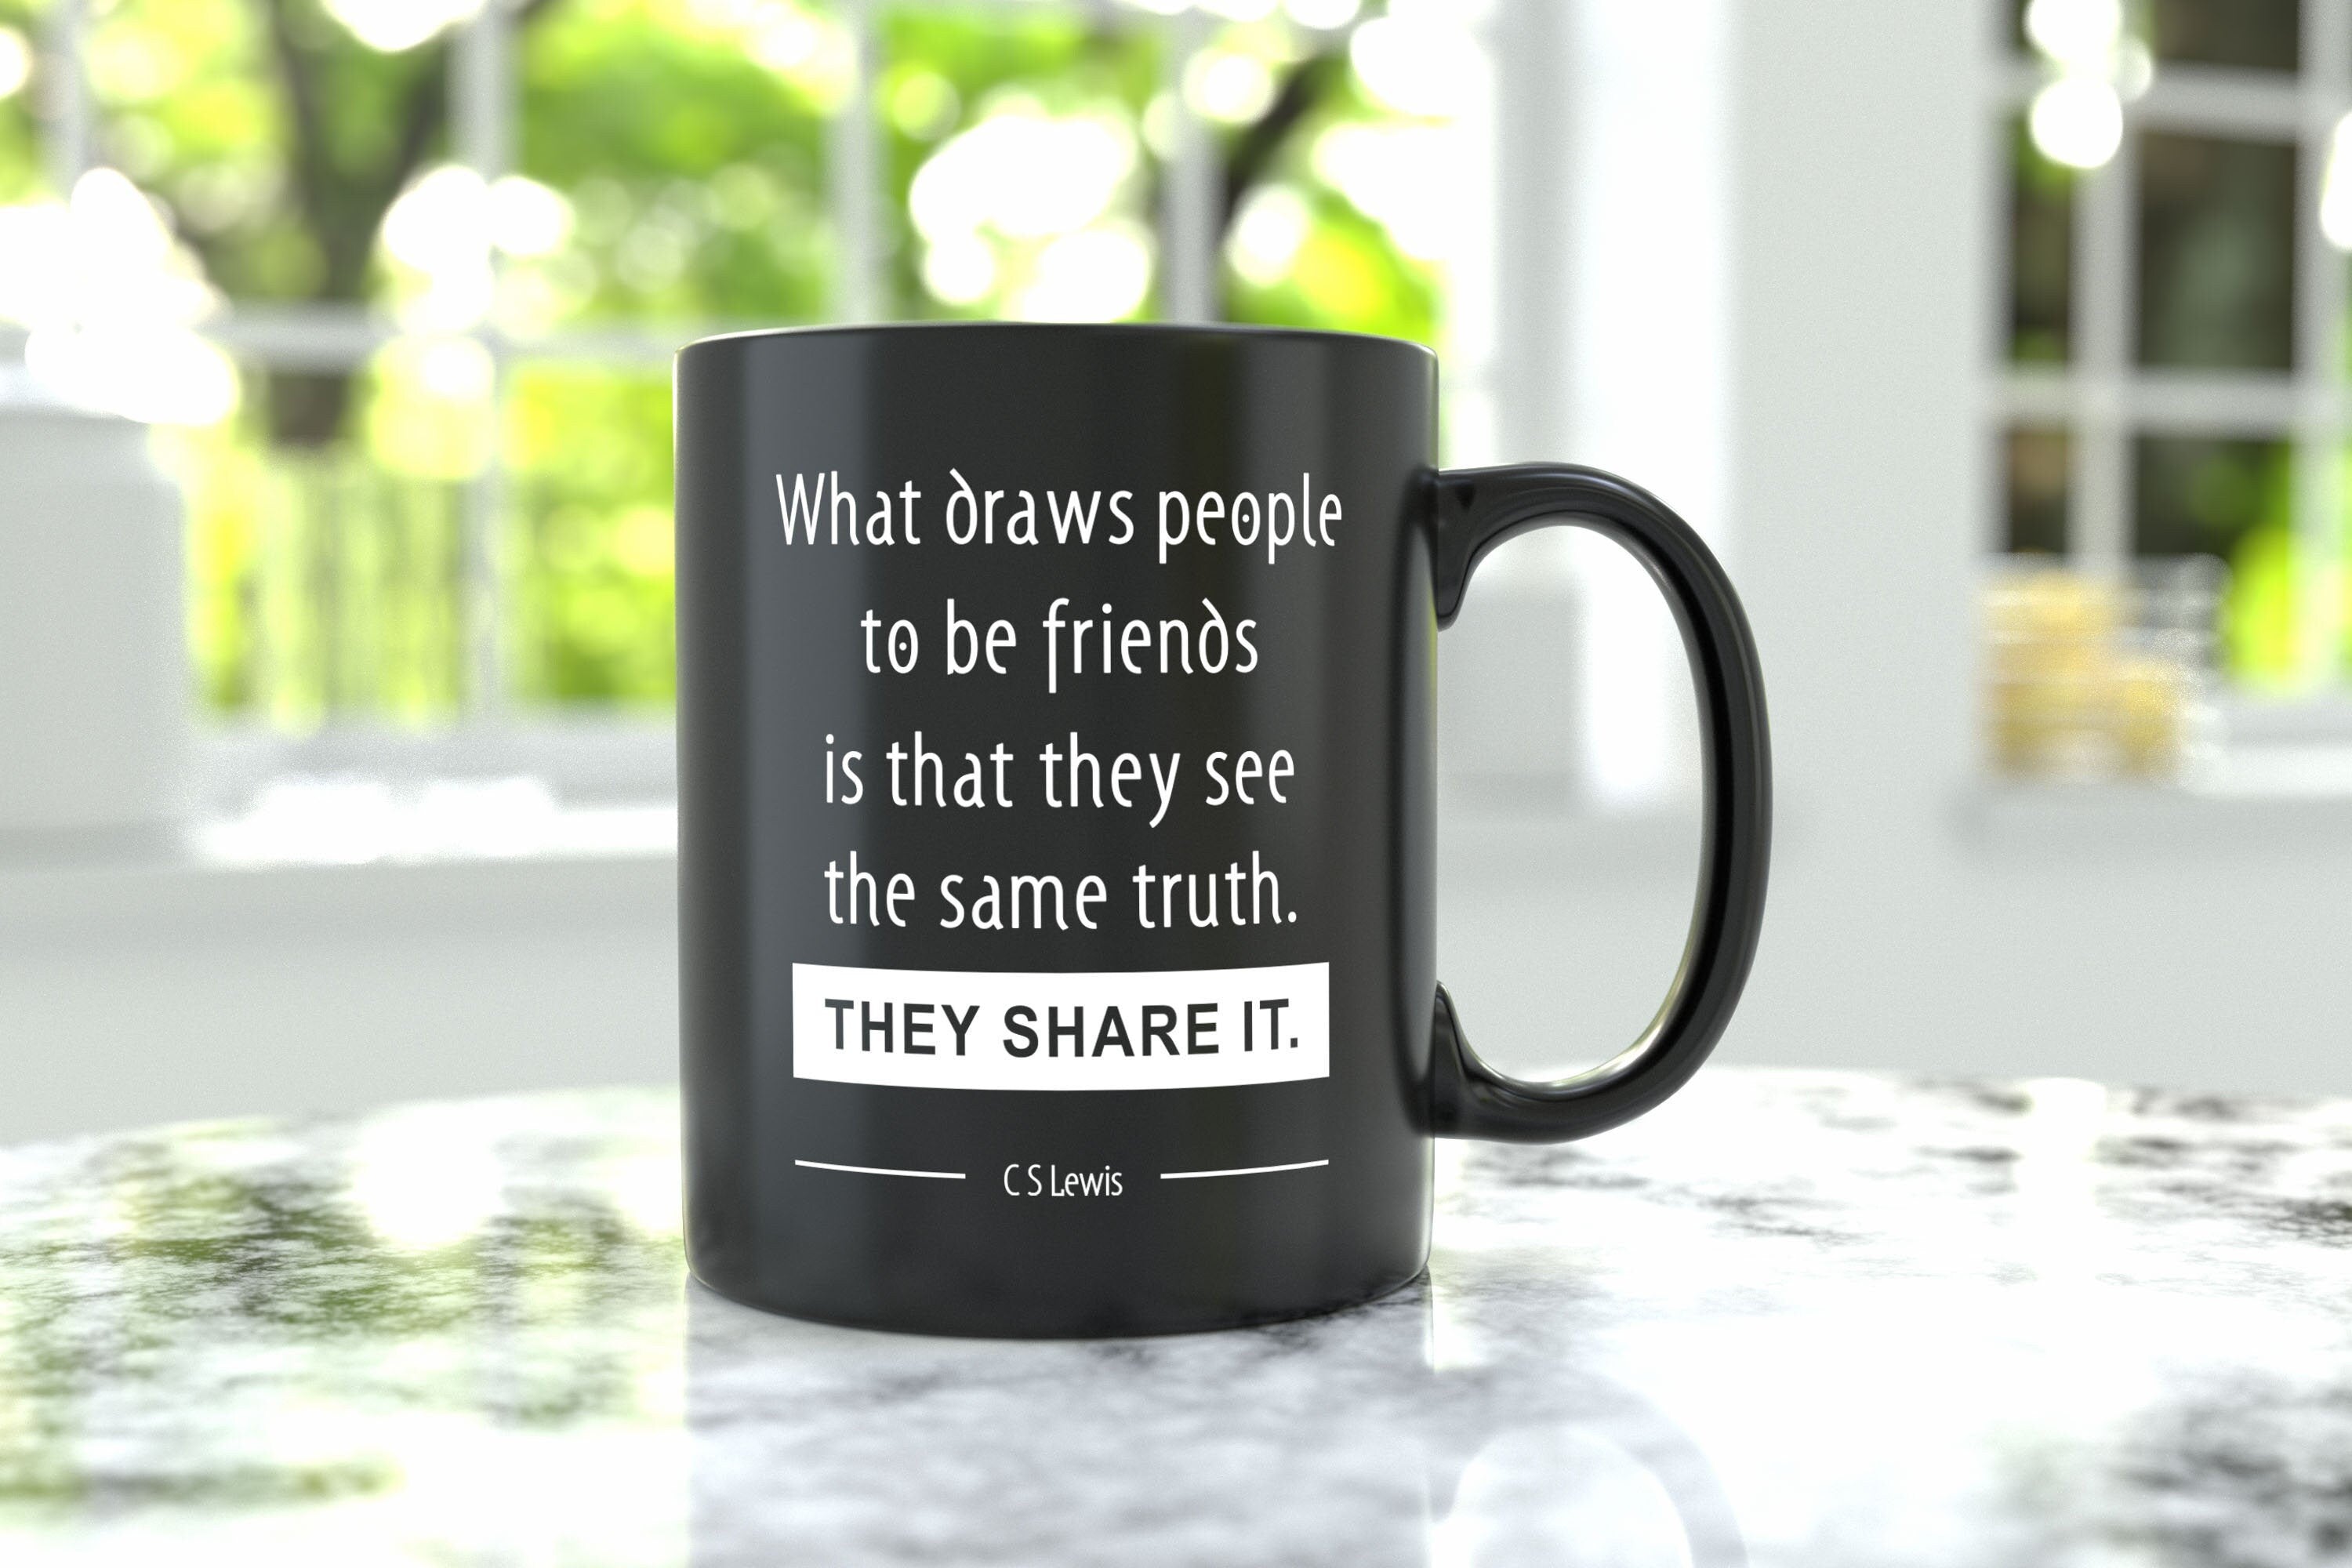 Friend Black Coffee Mug With C.S. Lewis Quote, What Draws People To Be Friends Is That They See The Same Truth